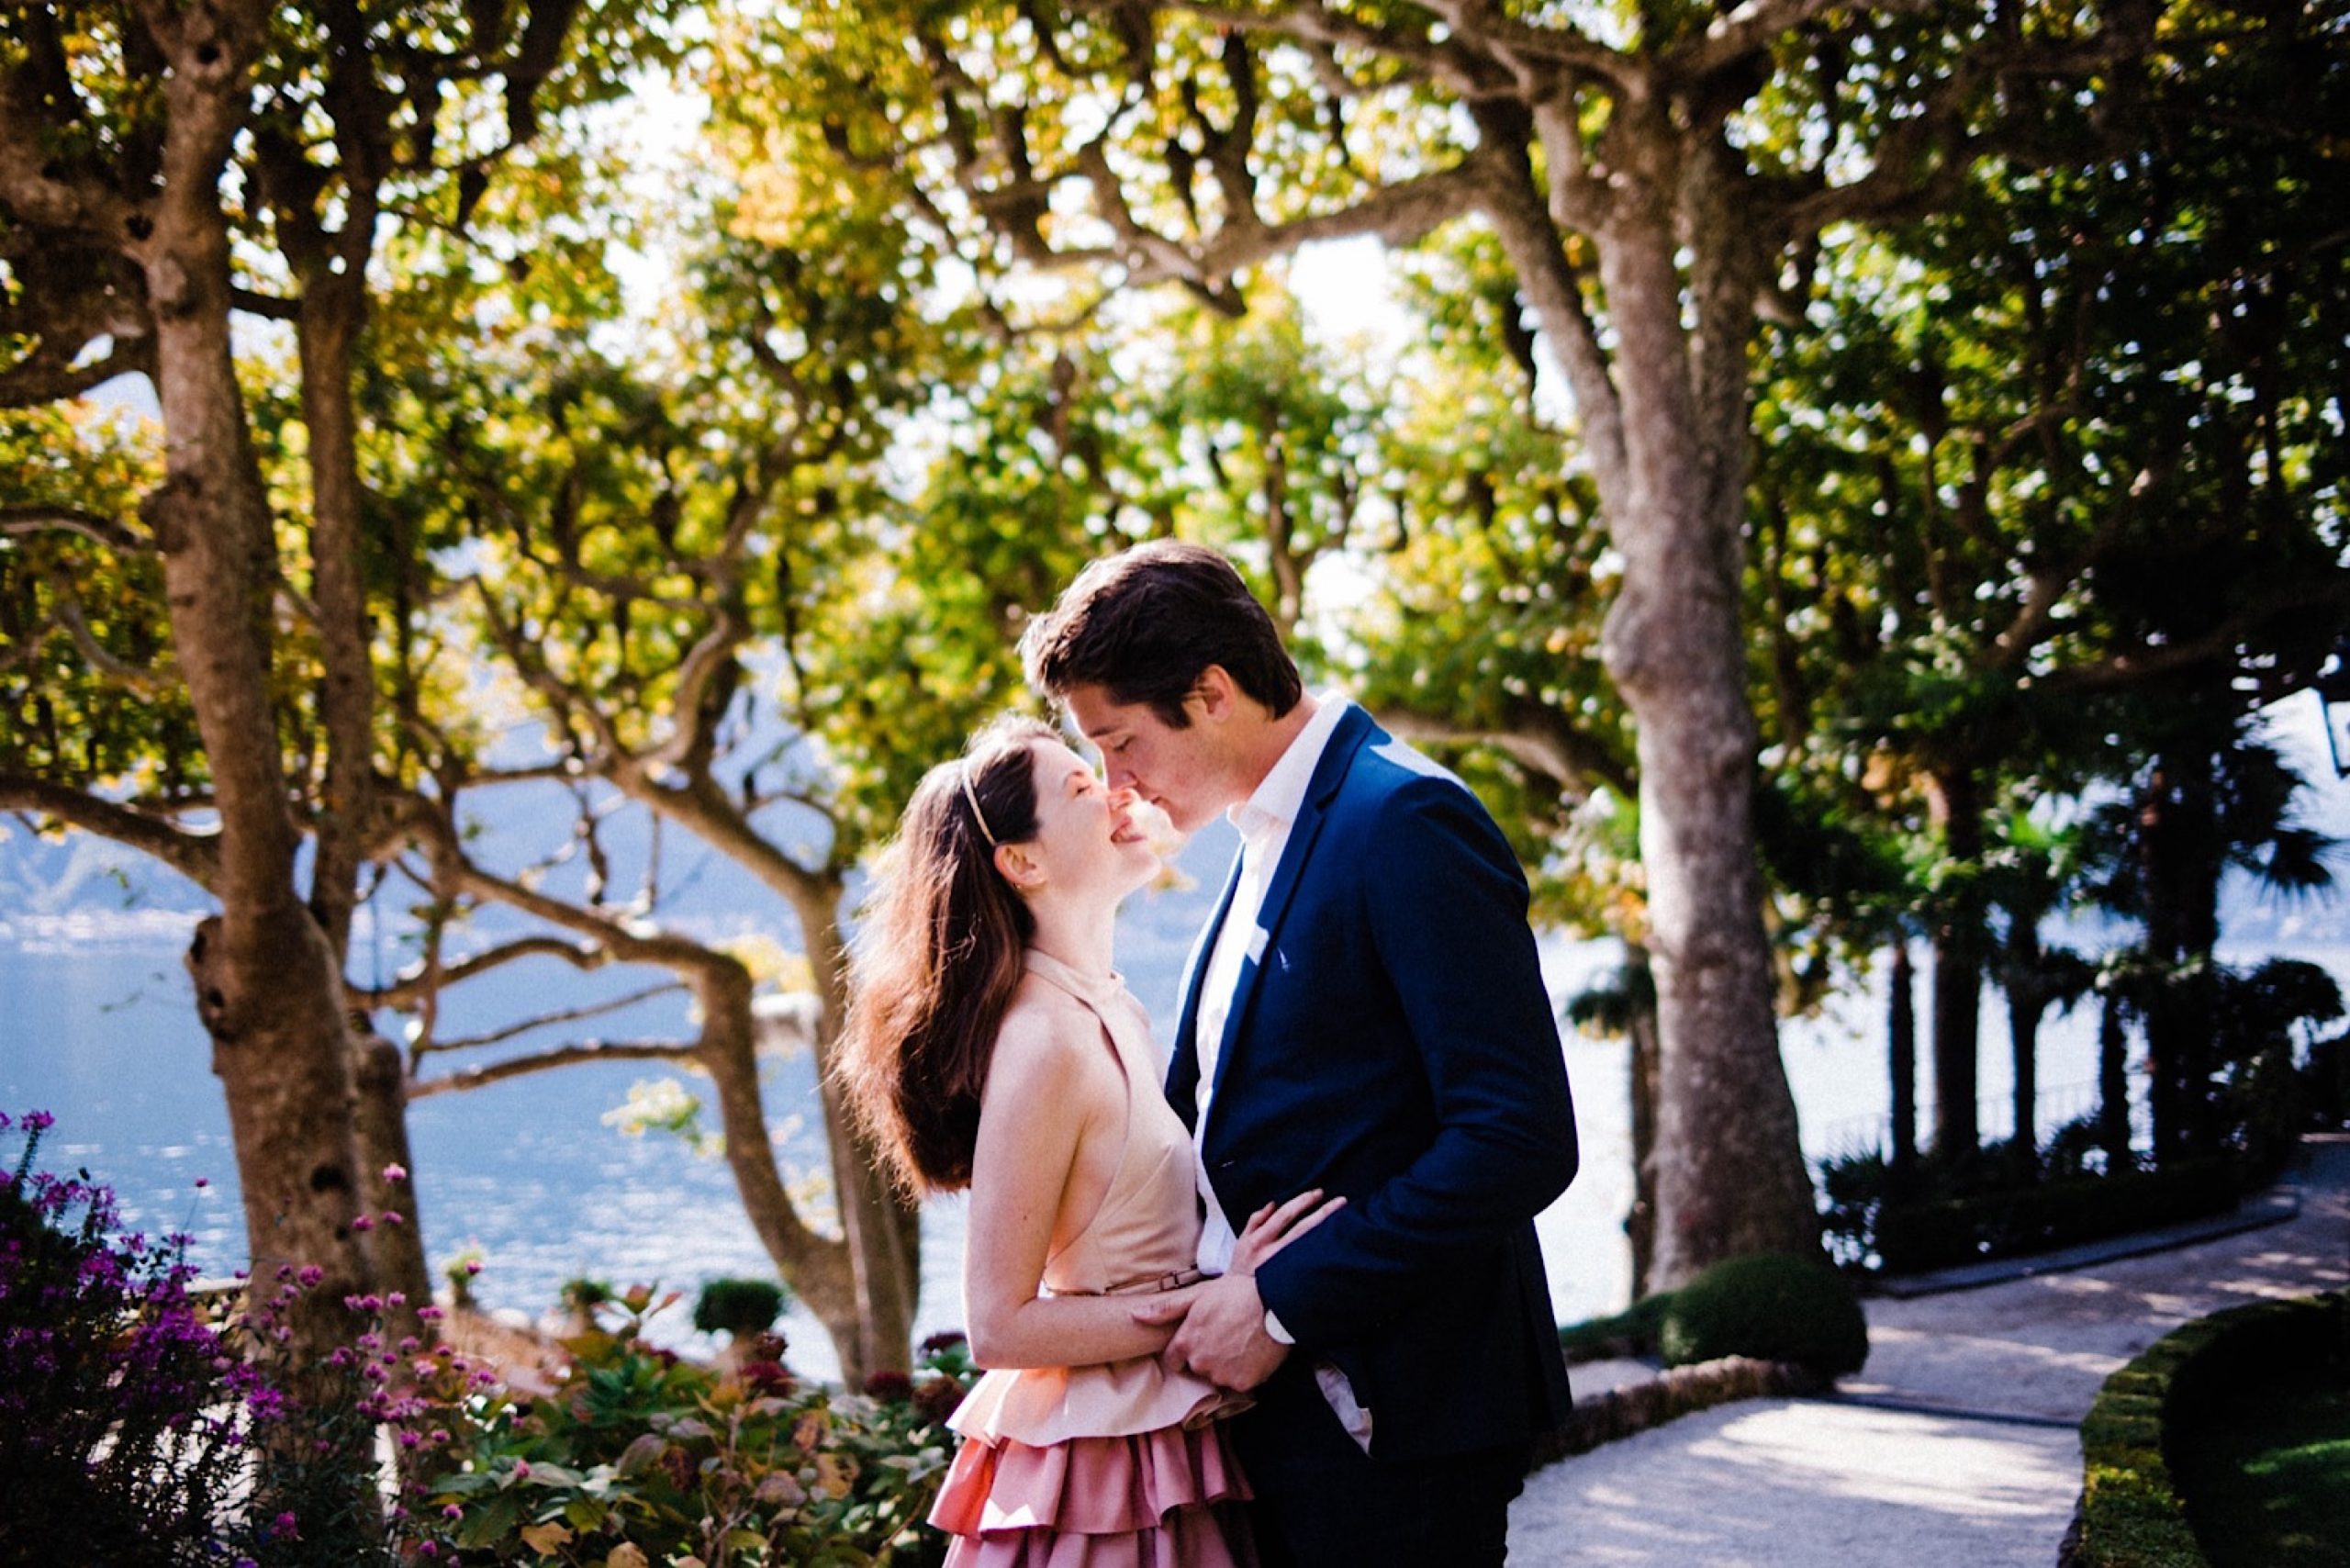 A mid-shot of a newly engaged couple kissing each other in front of gardens by Lake Como, in Northern Italy.